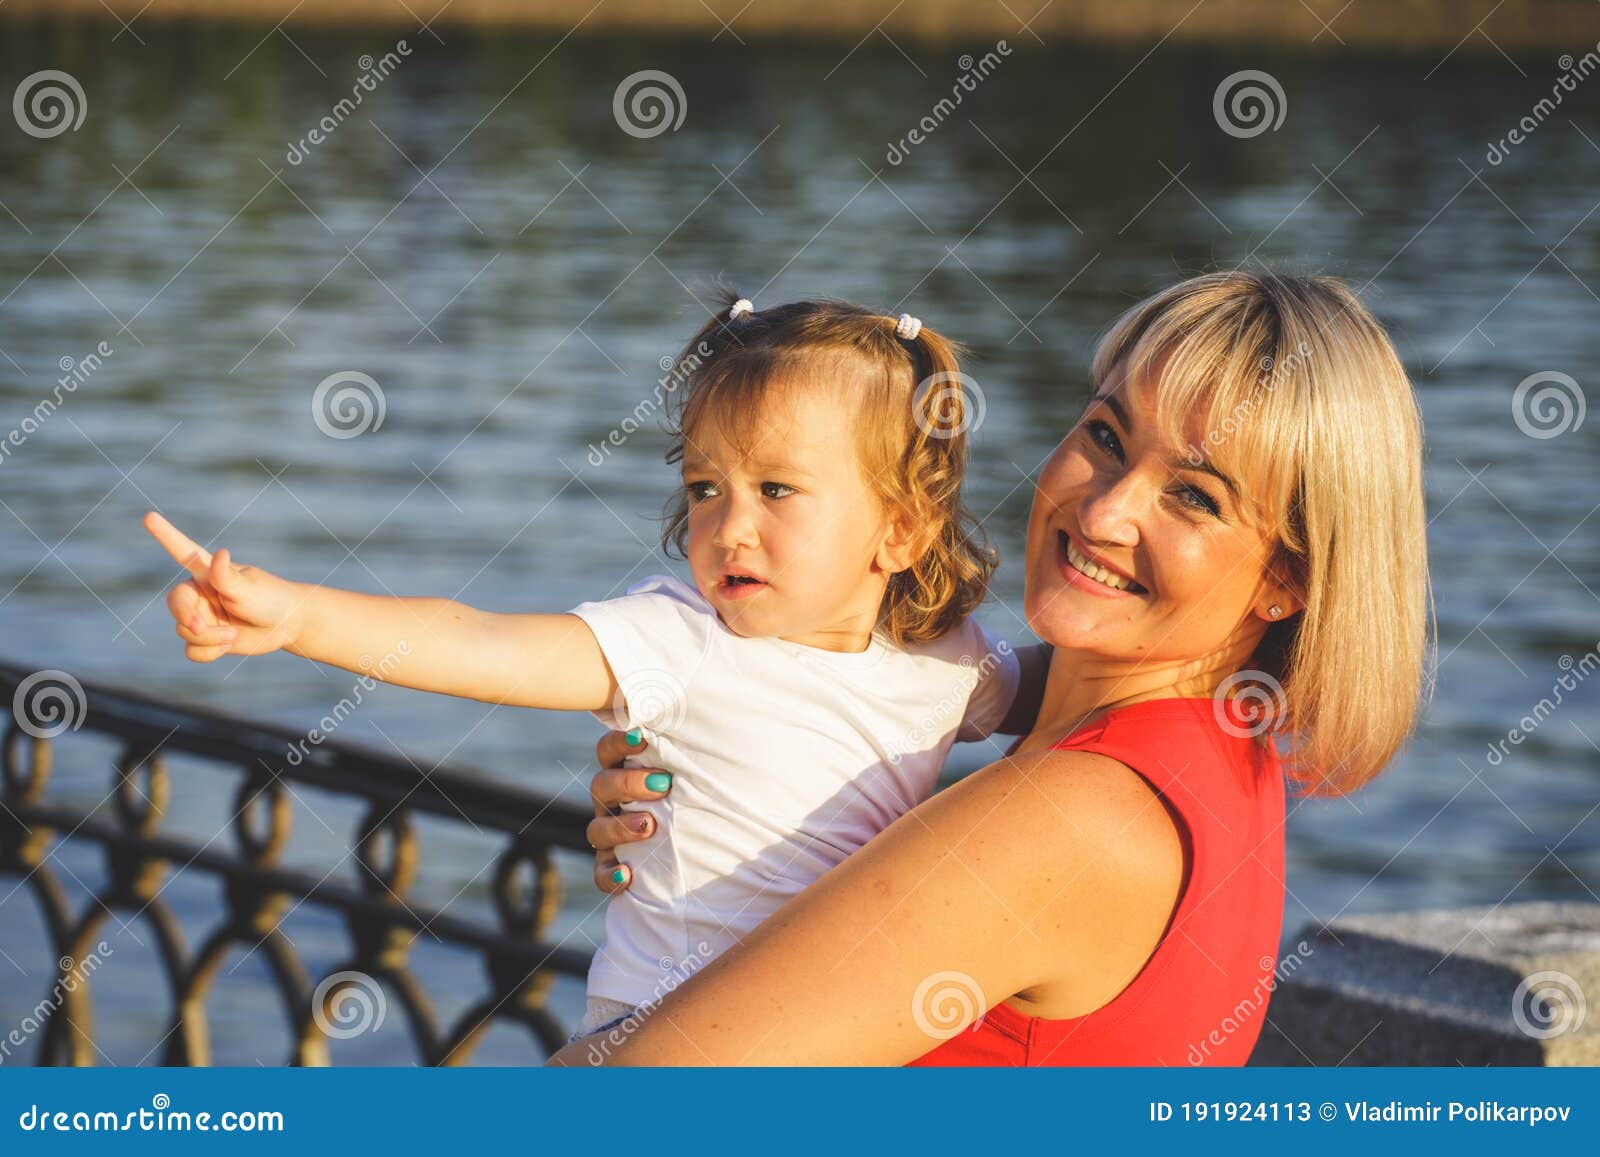 Beautiful Blonde Mom In A Red T Shirt With Her Daughter Group Portrait Stock Image Image Of